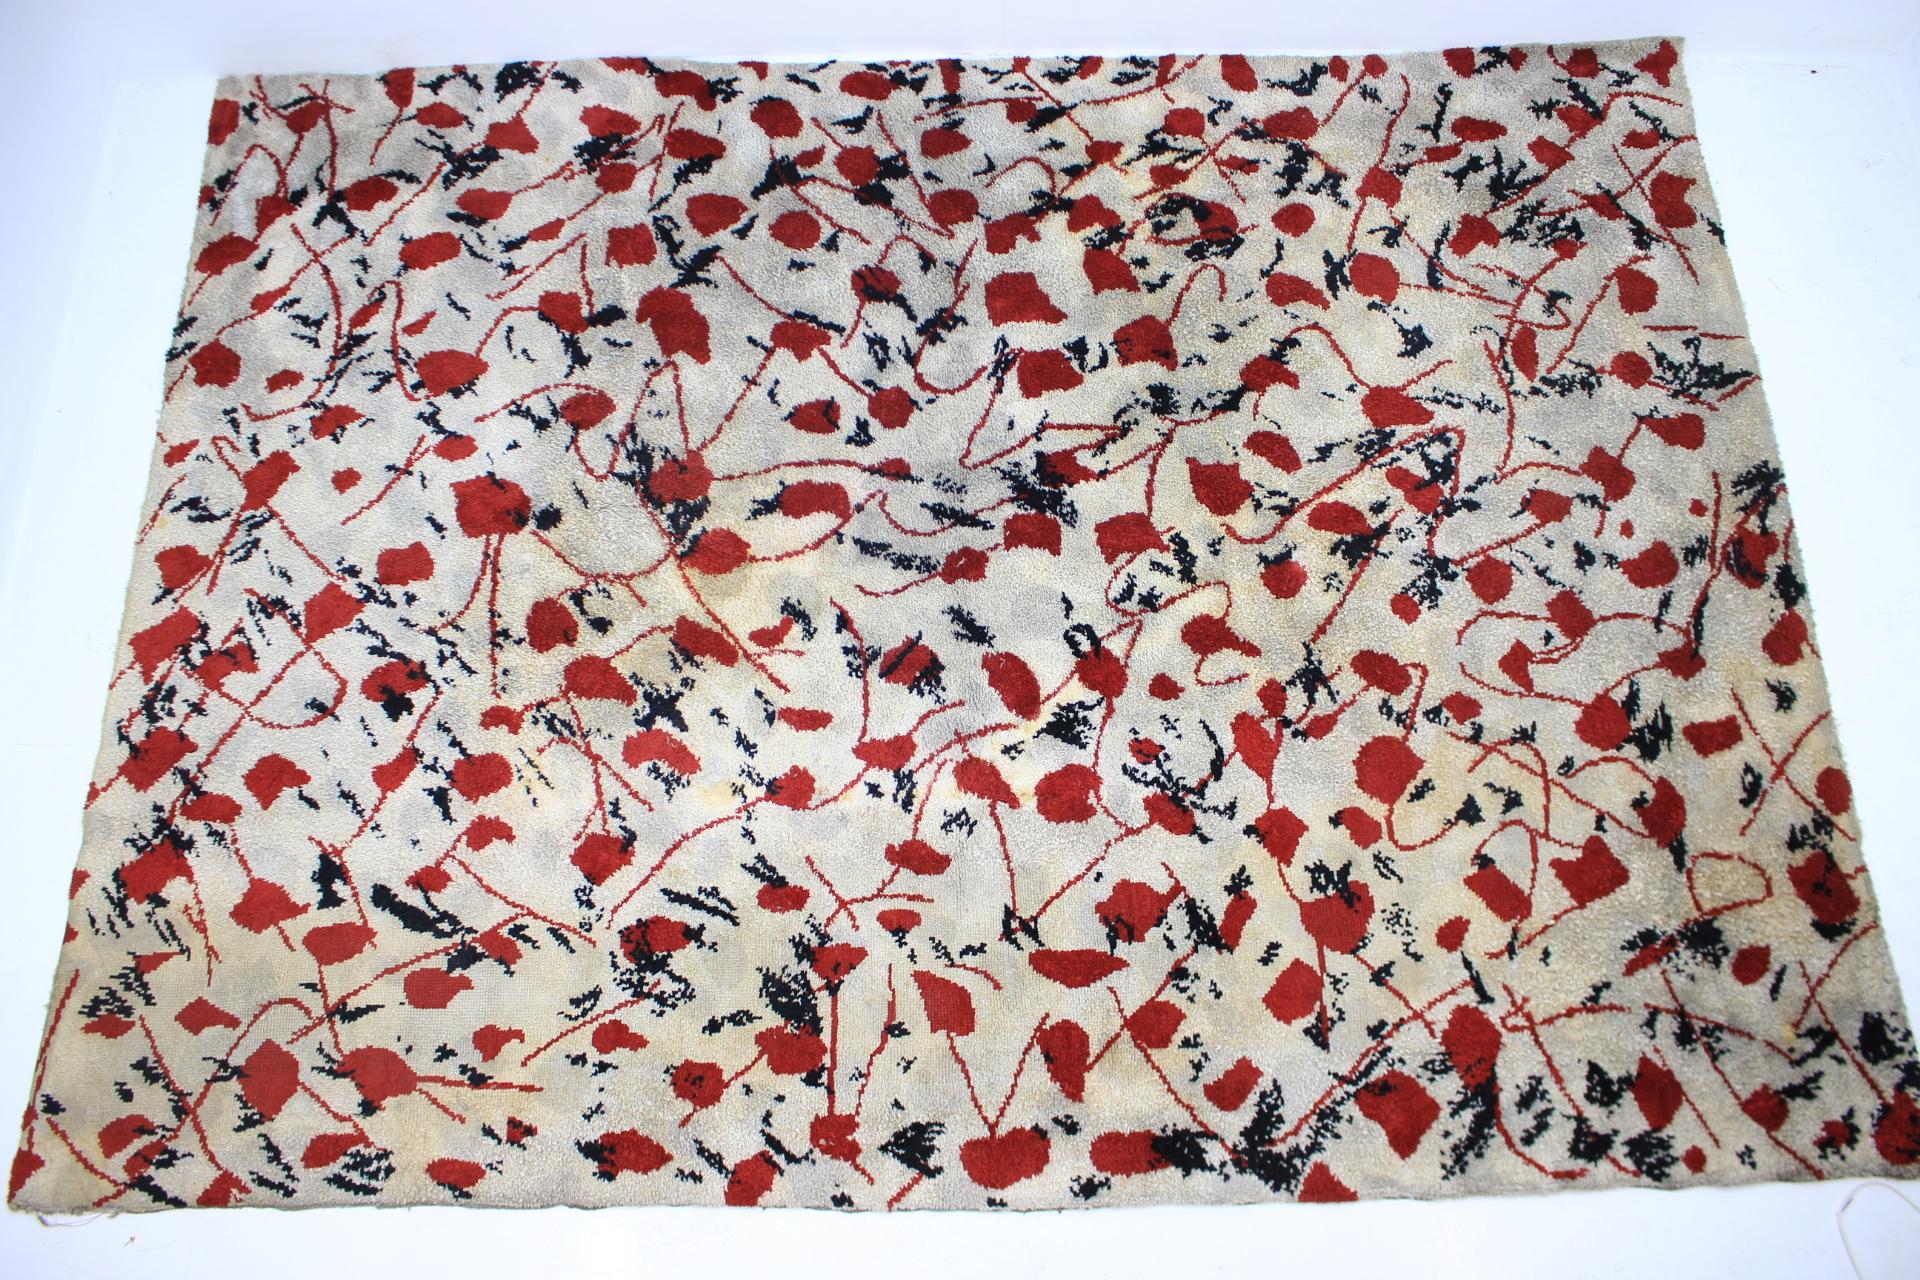 Hand-Knotted Modernist Art Organic Carpet or Rug, 1950 For Sale